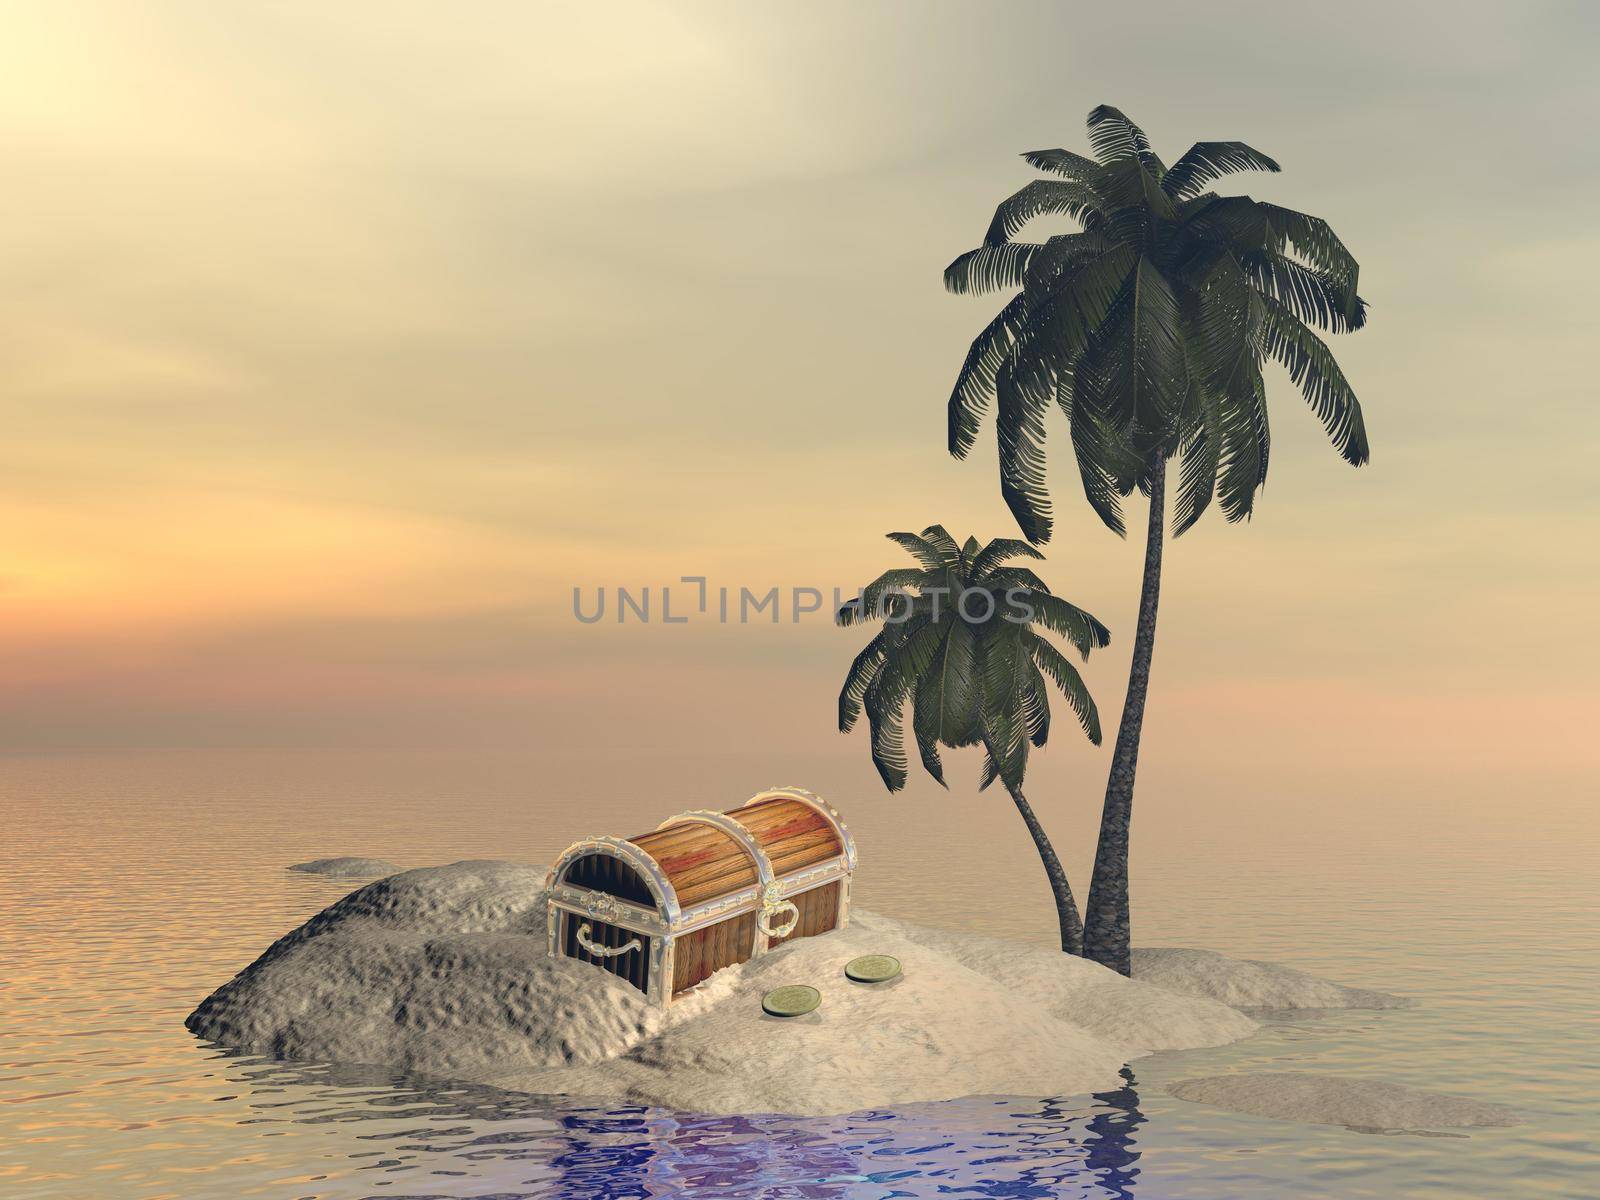 One treasure chest alone on small island with palm trees in the middle of ocean by sunset